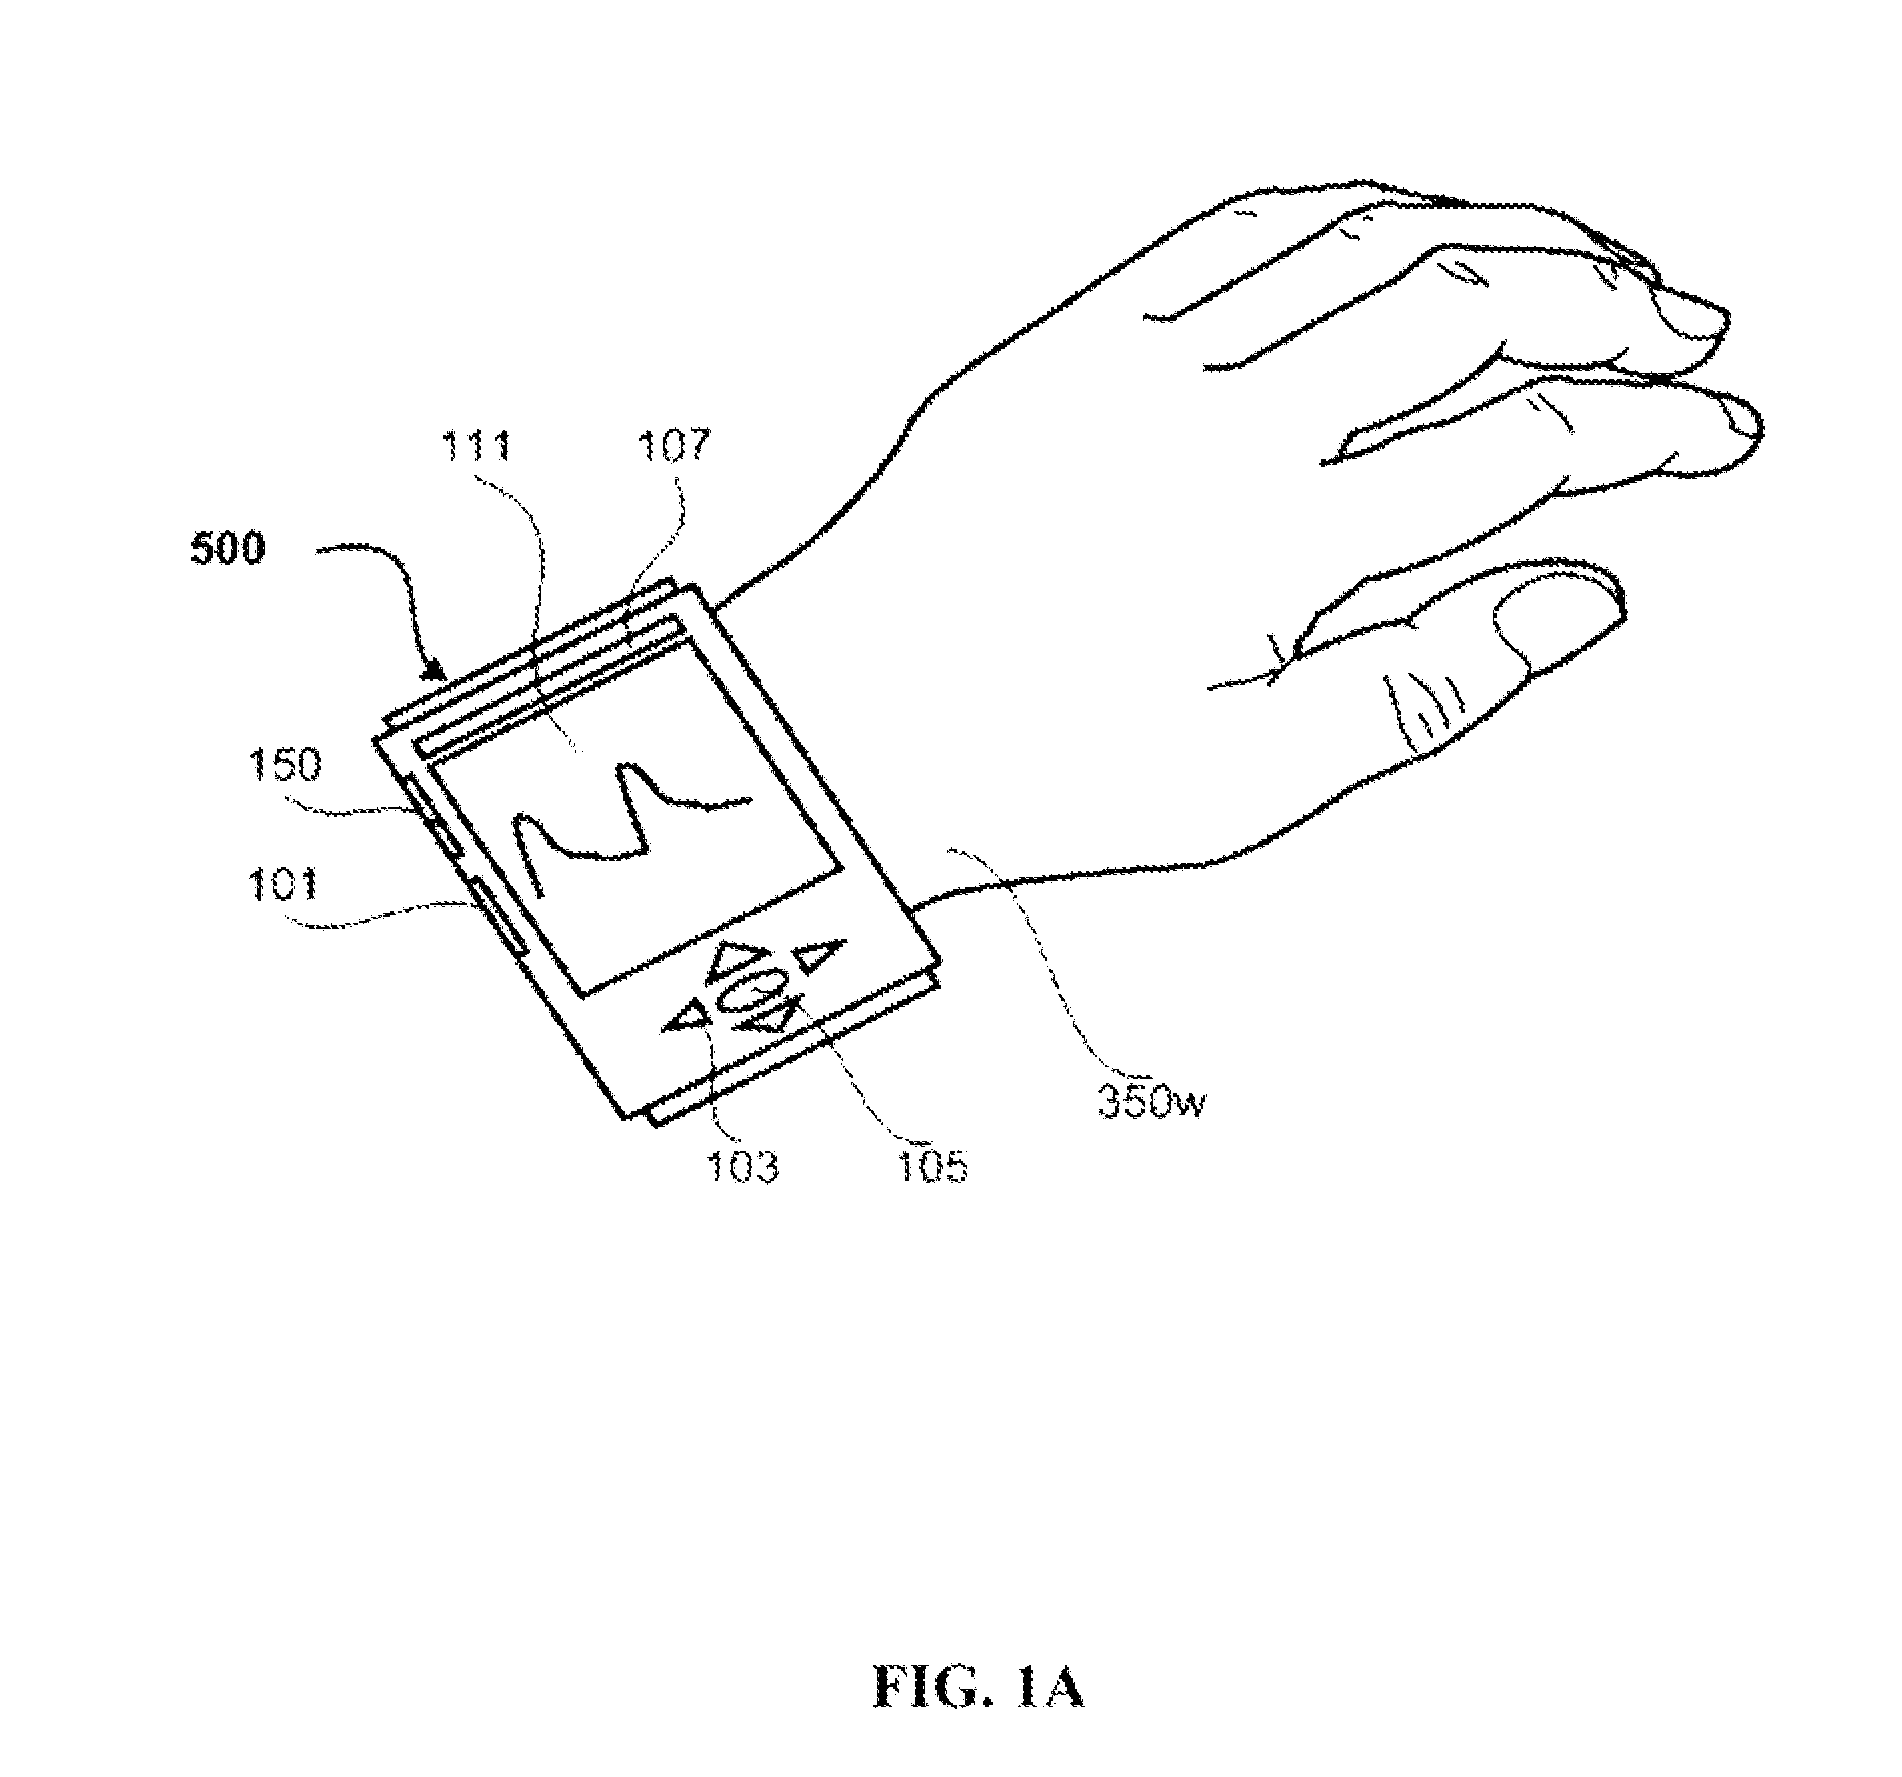 Apparatus and method for sensing radial arterial pulses for noninvasive and continuous measurement of blood pressure and arterial elasticity